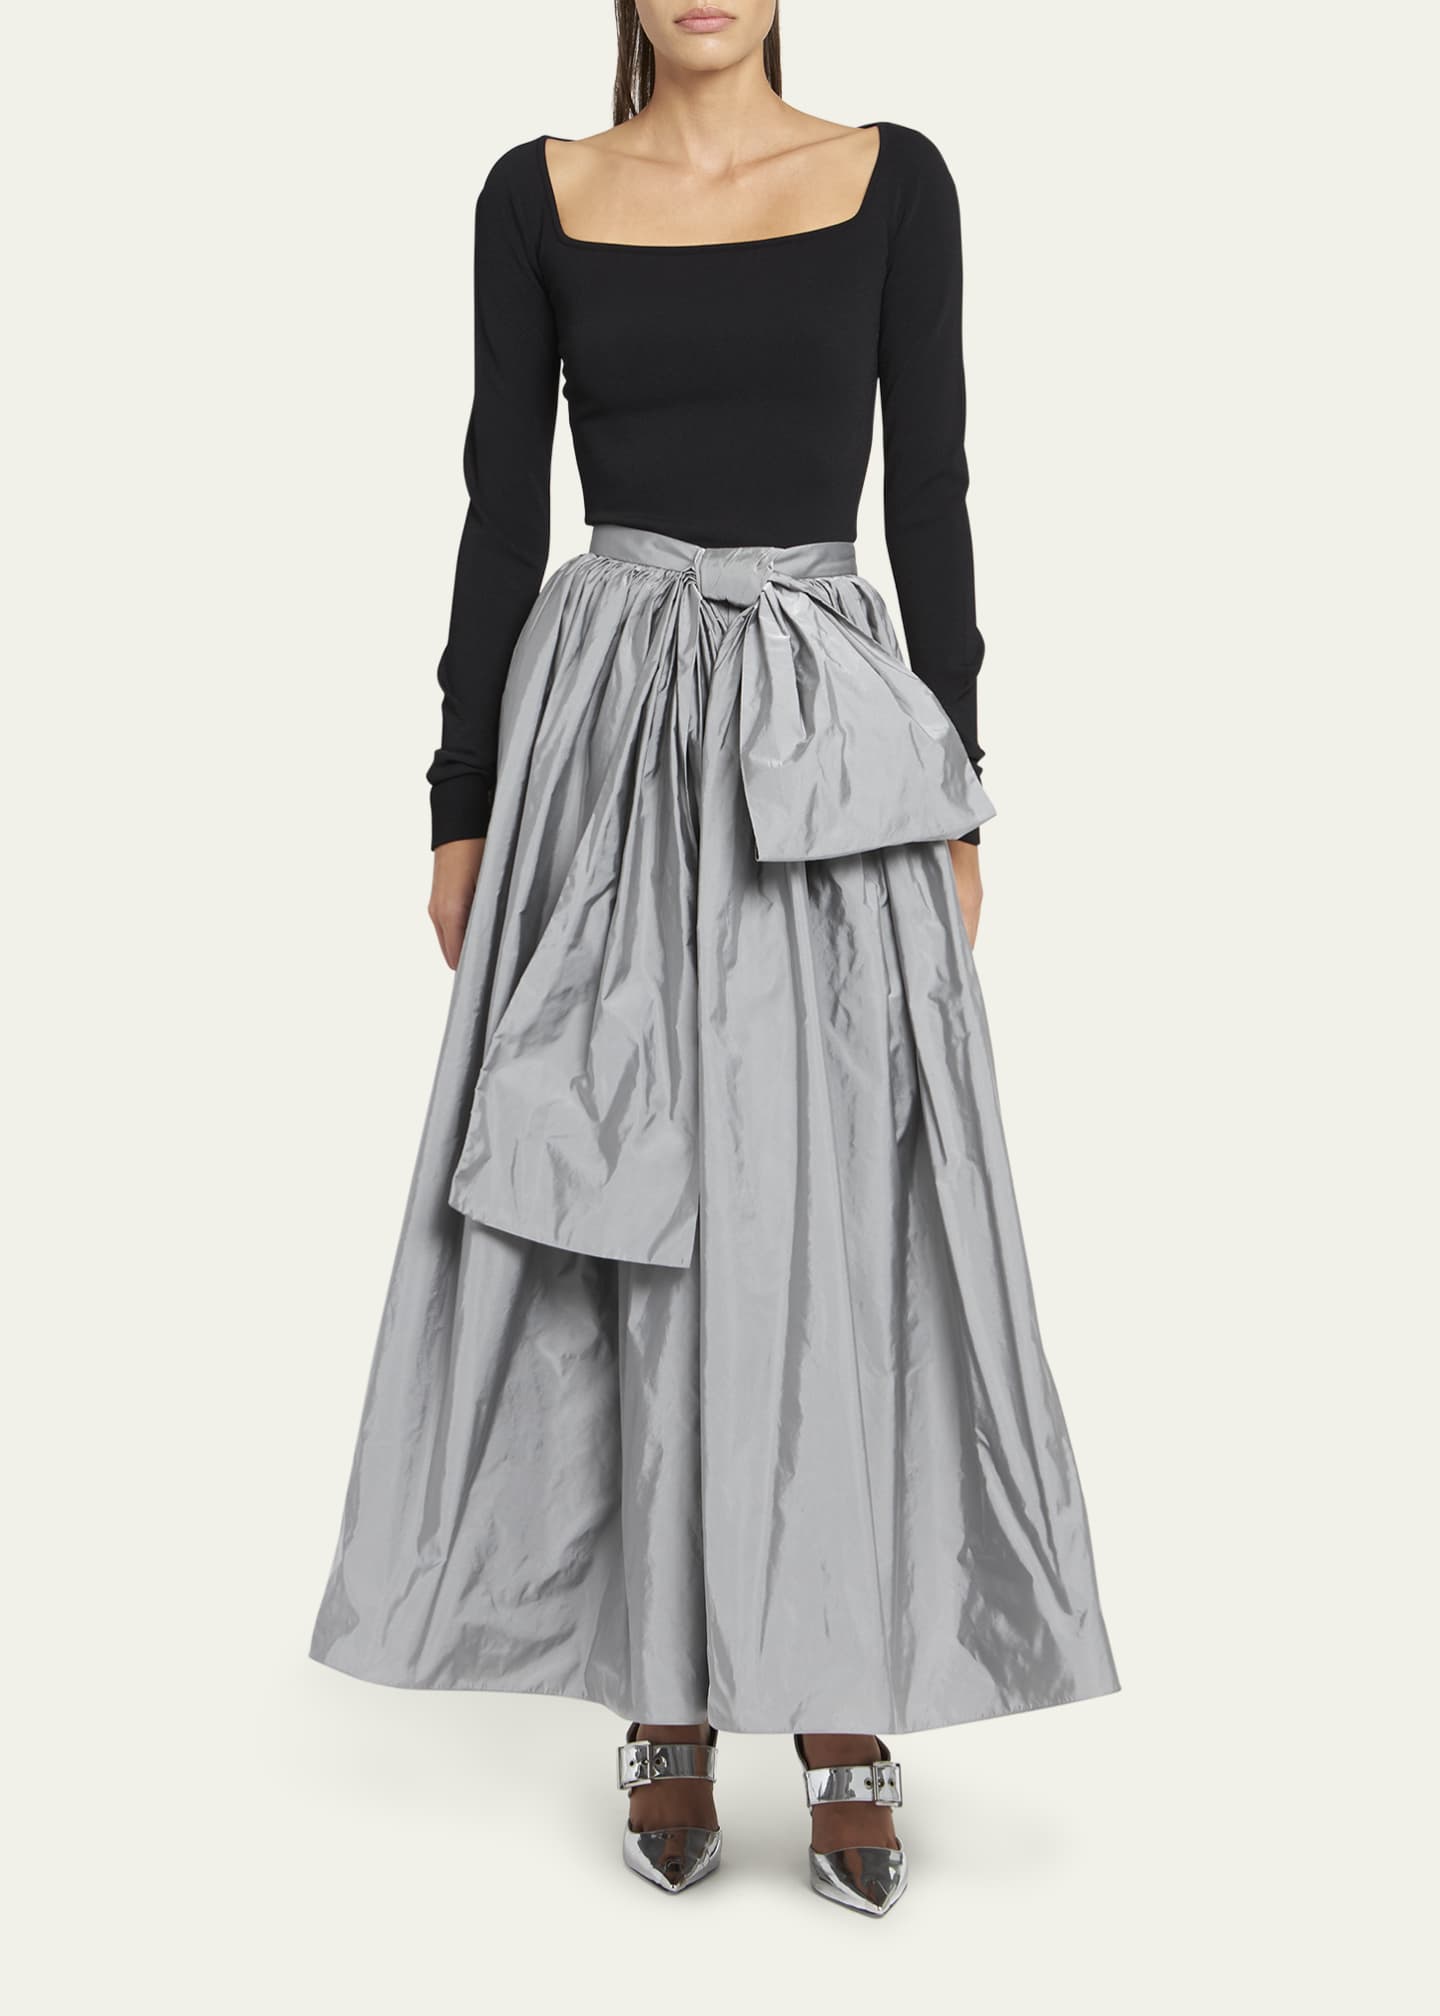 Alexander McQueen Ruched Midi Skirt with Bow Detail - Bergdorf Goodman